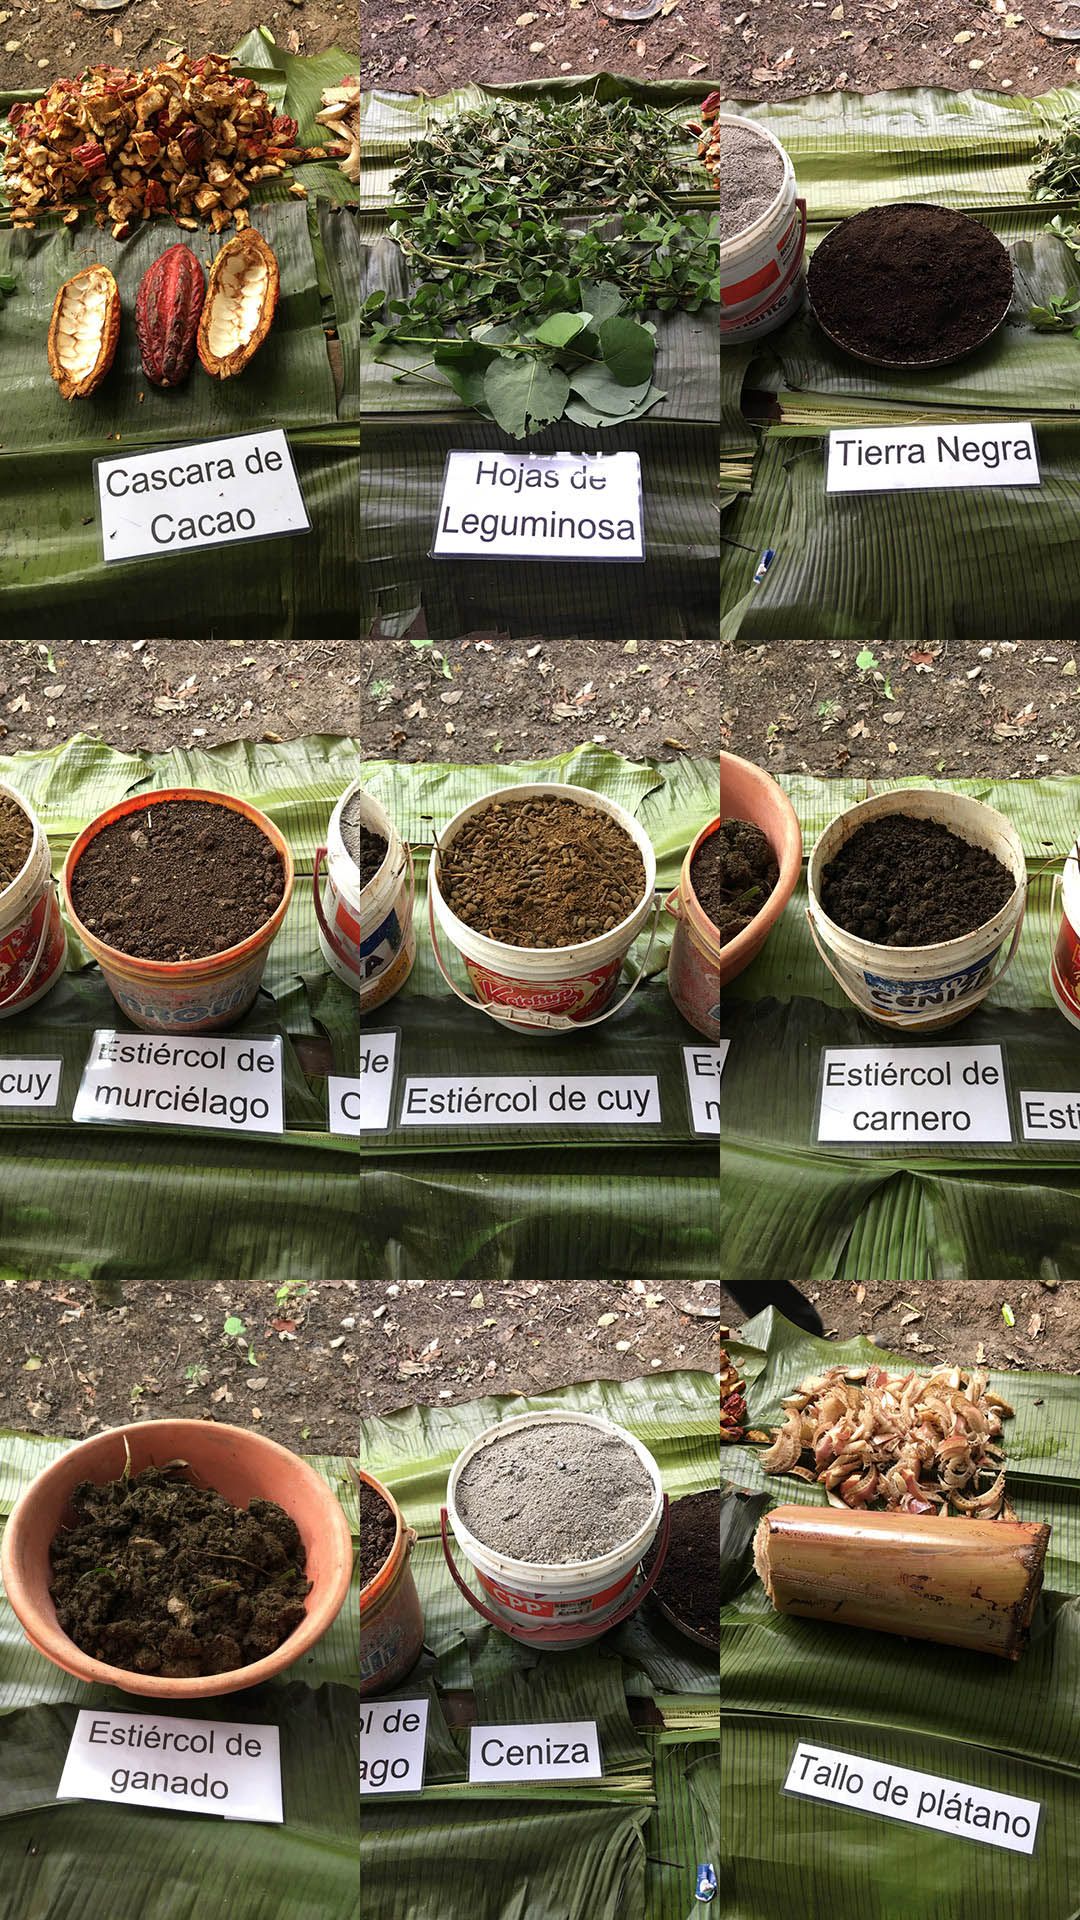 9 of the 10 components of the organic composted fertilizer used in the high-density, high-intensity, “lollipop” planting scheme at the Empresa Agroforestal y Ambiental Alborada in Tingo Maria, Peru. The 10th component is cacao juice.